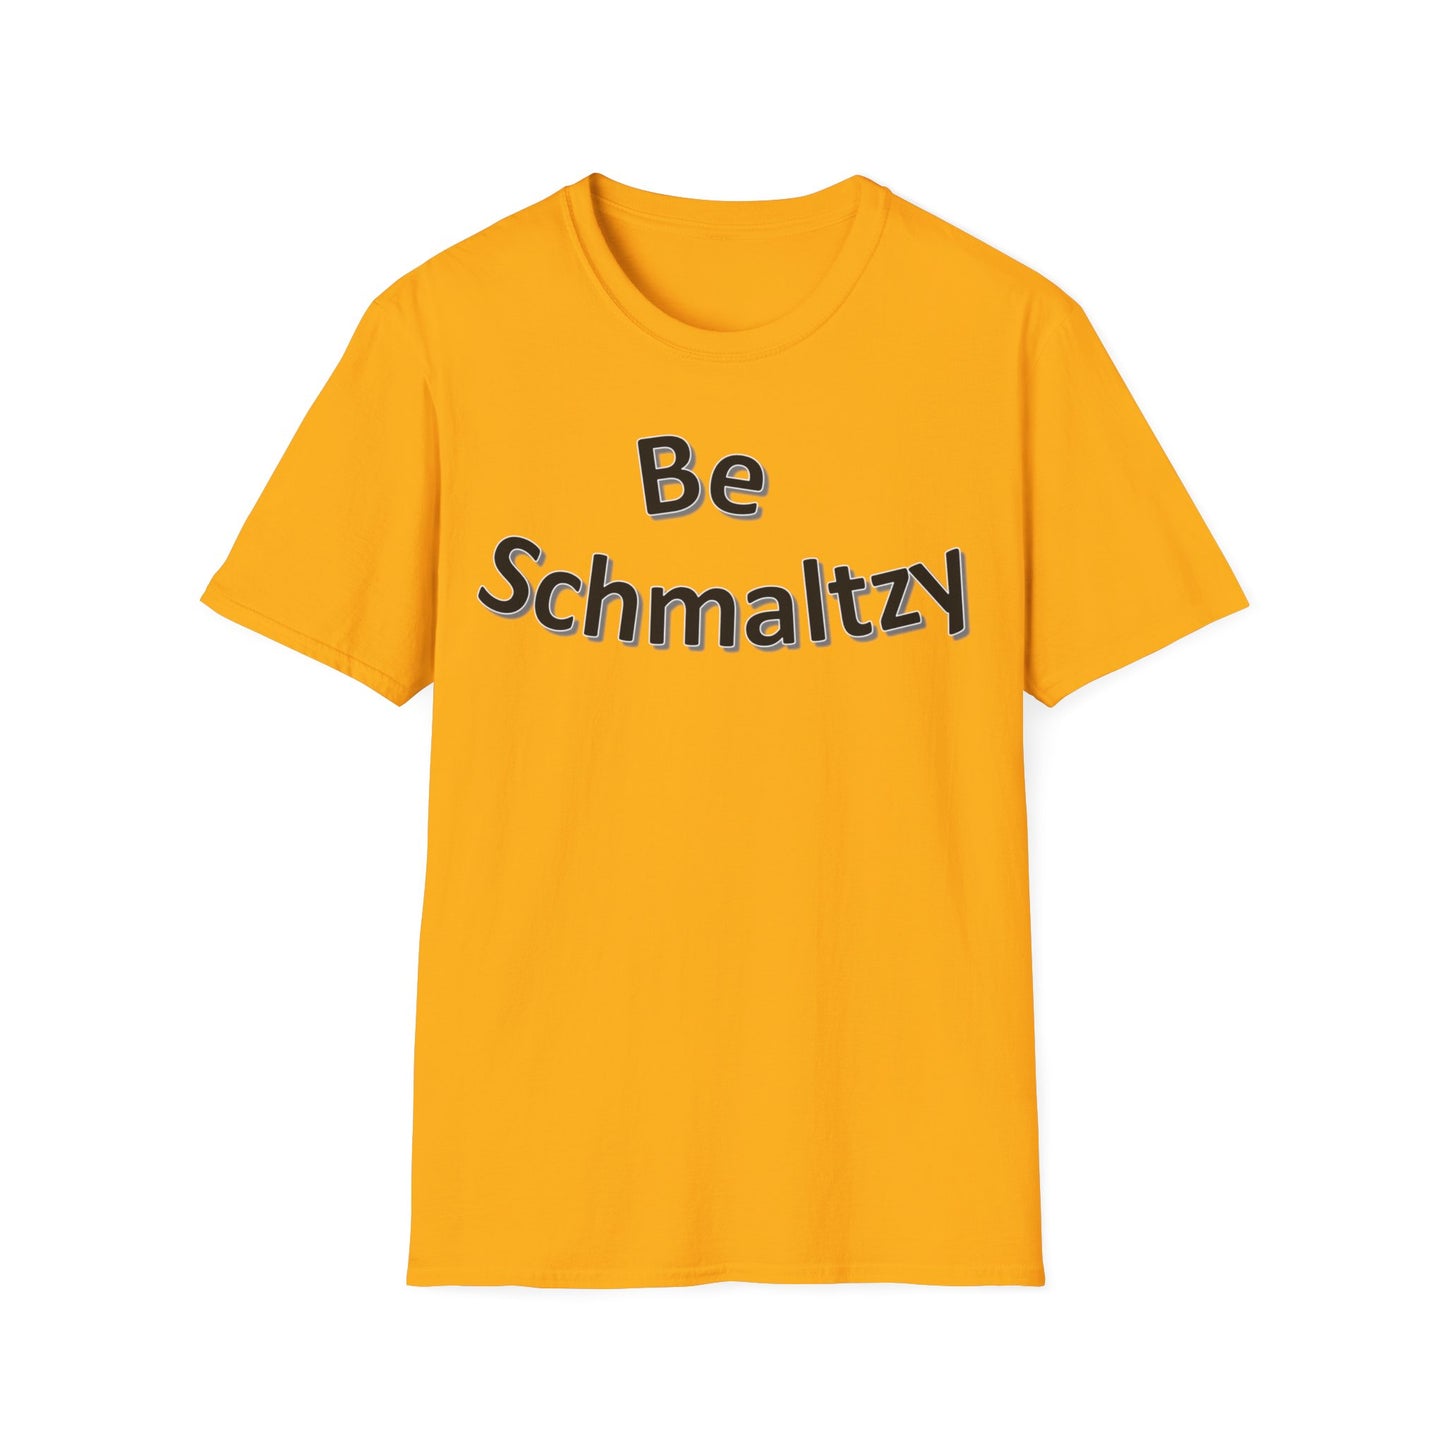 Be Schmaltzy - Unisex Softstyle T-Shirt - Multiple Colors Available